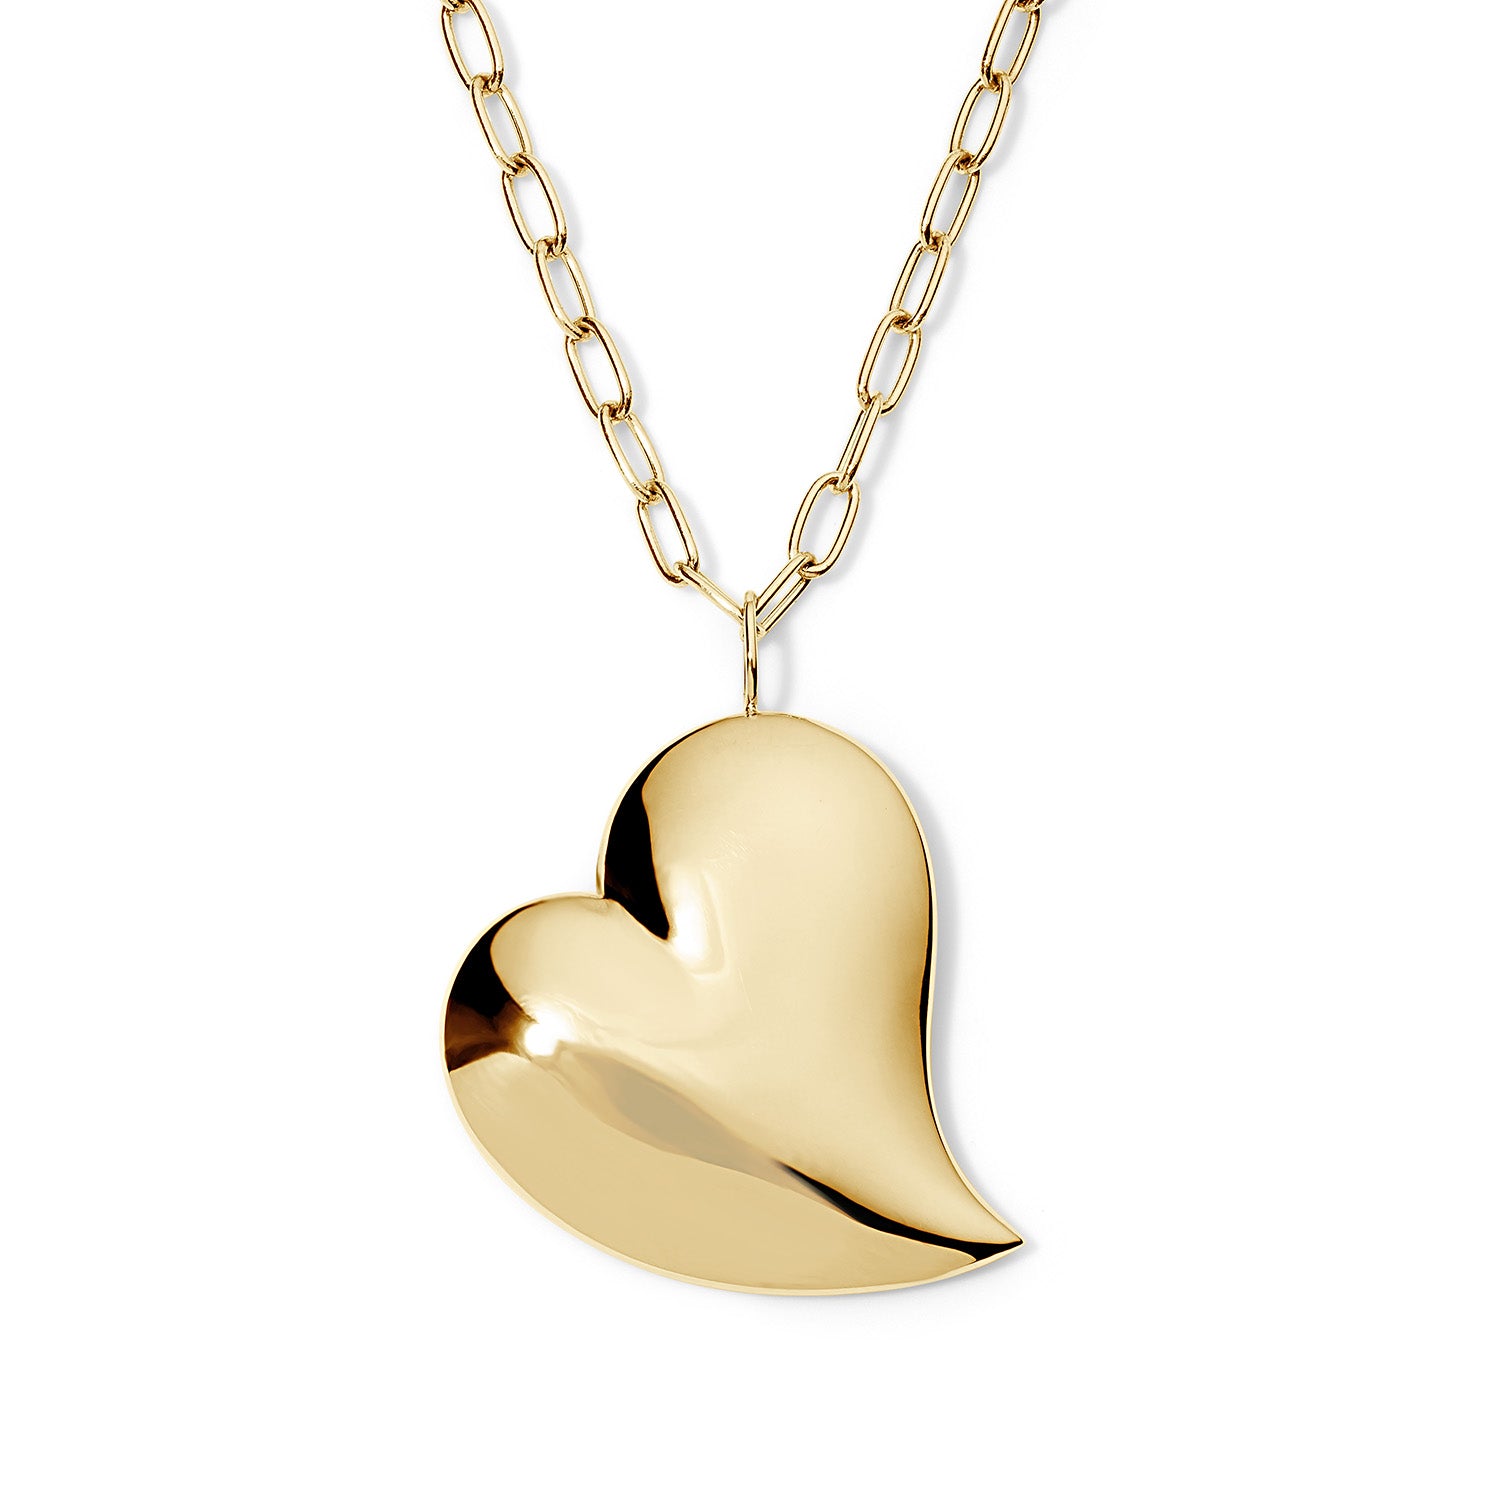 Heartfelt Gold Jumbo Puffy Heart with Paperclip Chain Necklace